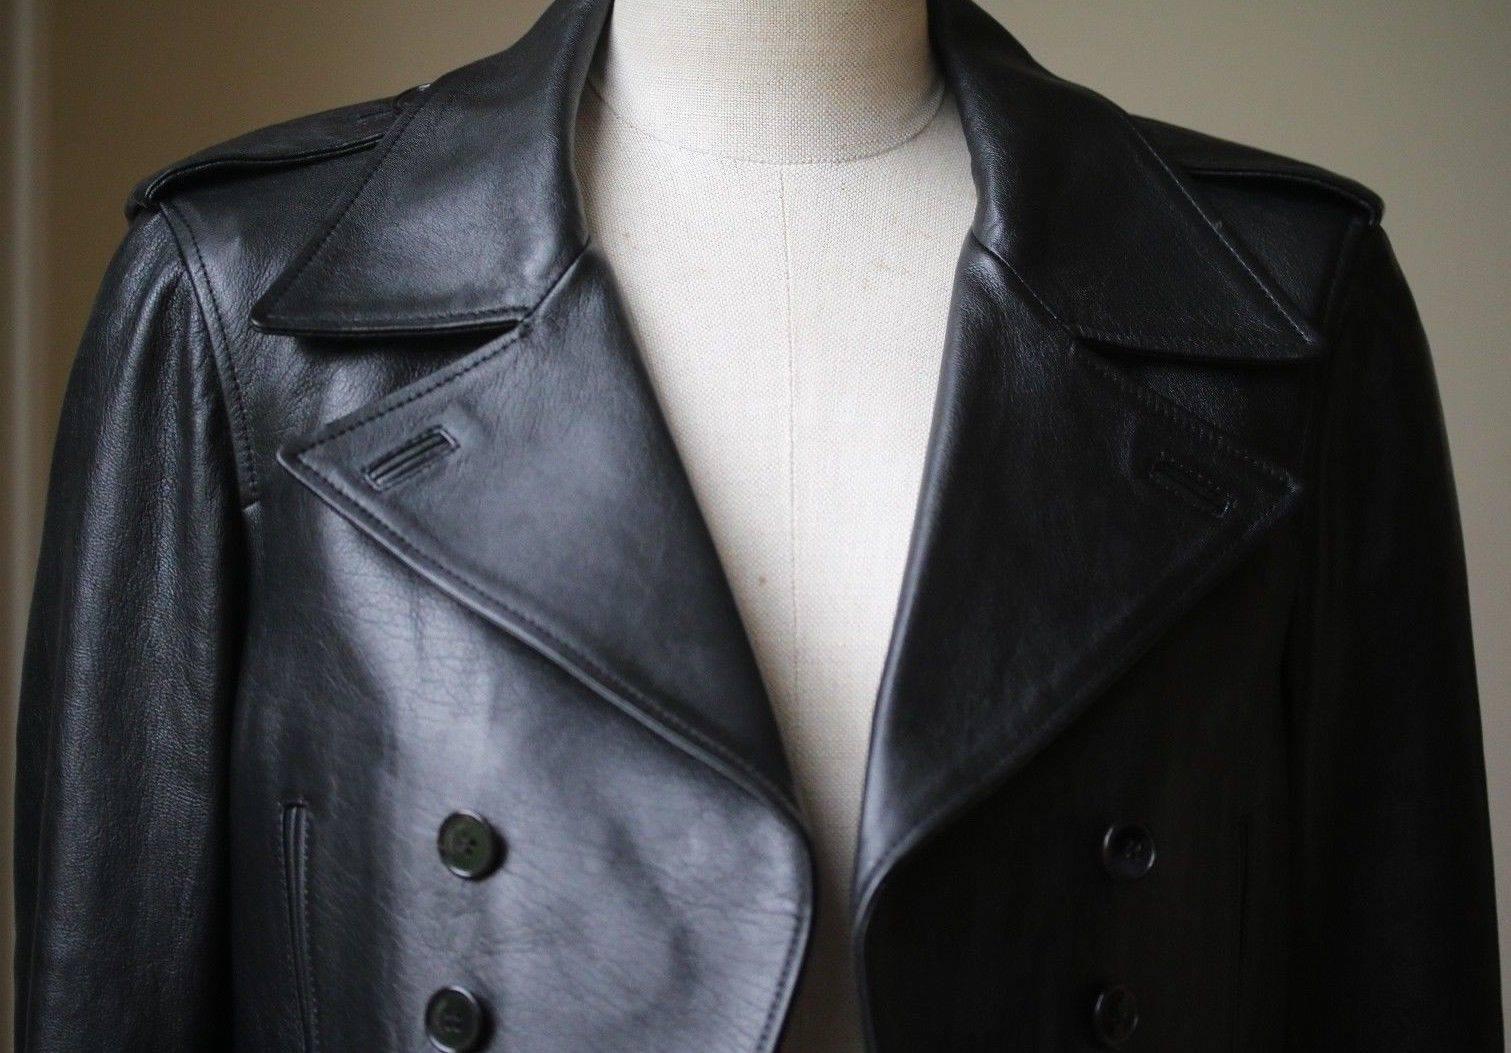 Black cotton and lamb skin cropped leather jacket from Saint Laurent featuring notched lapels, buttoned shoulder tabs, long sleeves, button cuffs, side slit pockets and a double breasted front fastening. Color: black. 100% Leather. Comes up